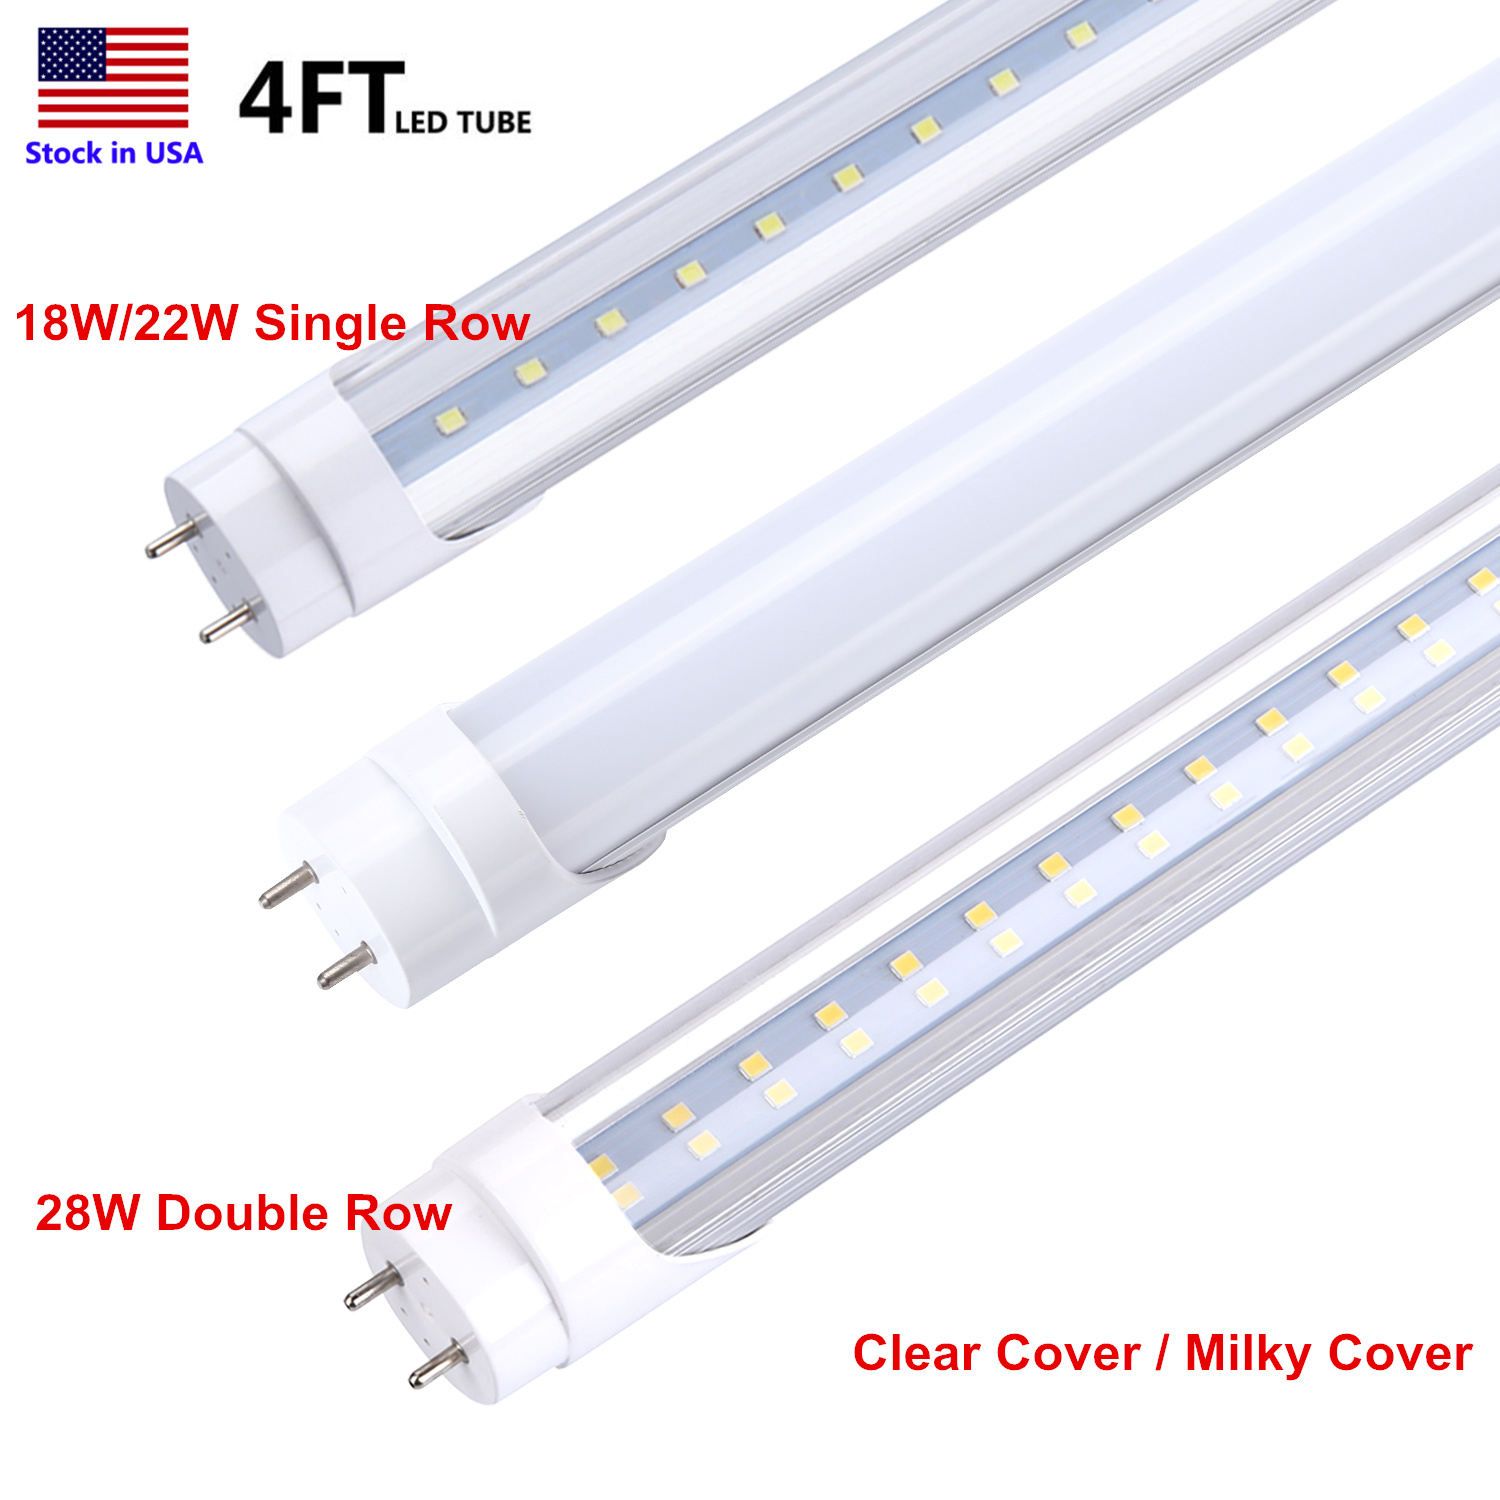 LED TUBE tubes 4FT 18W T8 G13 LIGHT FLUORESCENT BULBS REPLACEMENT FREE SHIPPING 